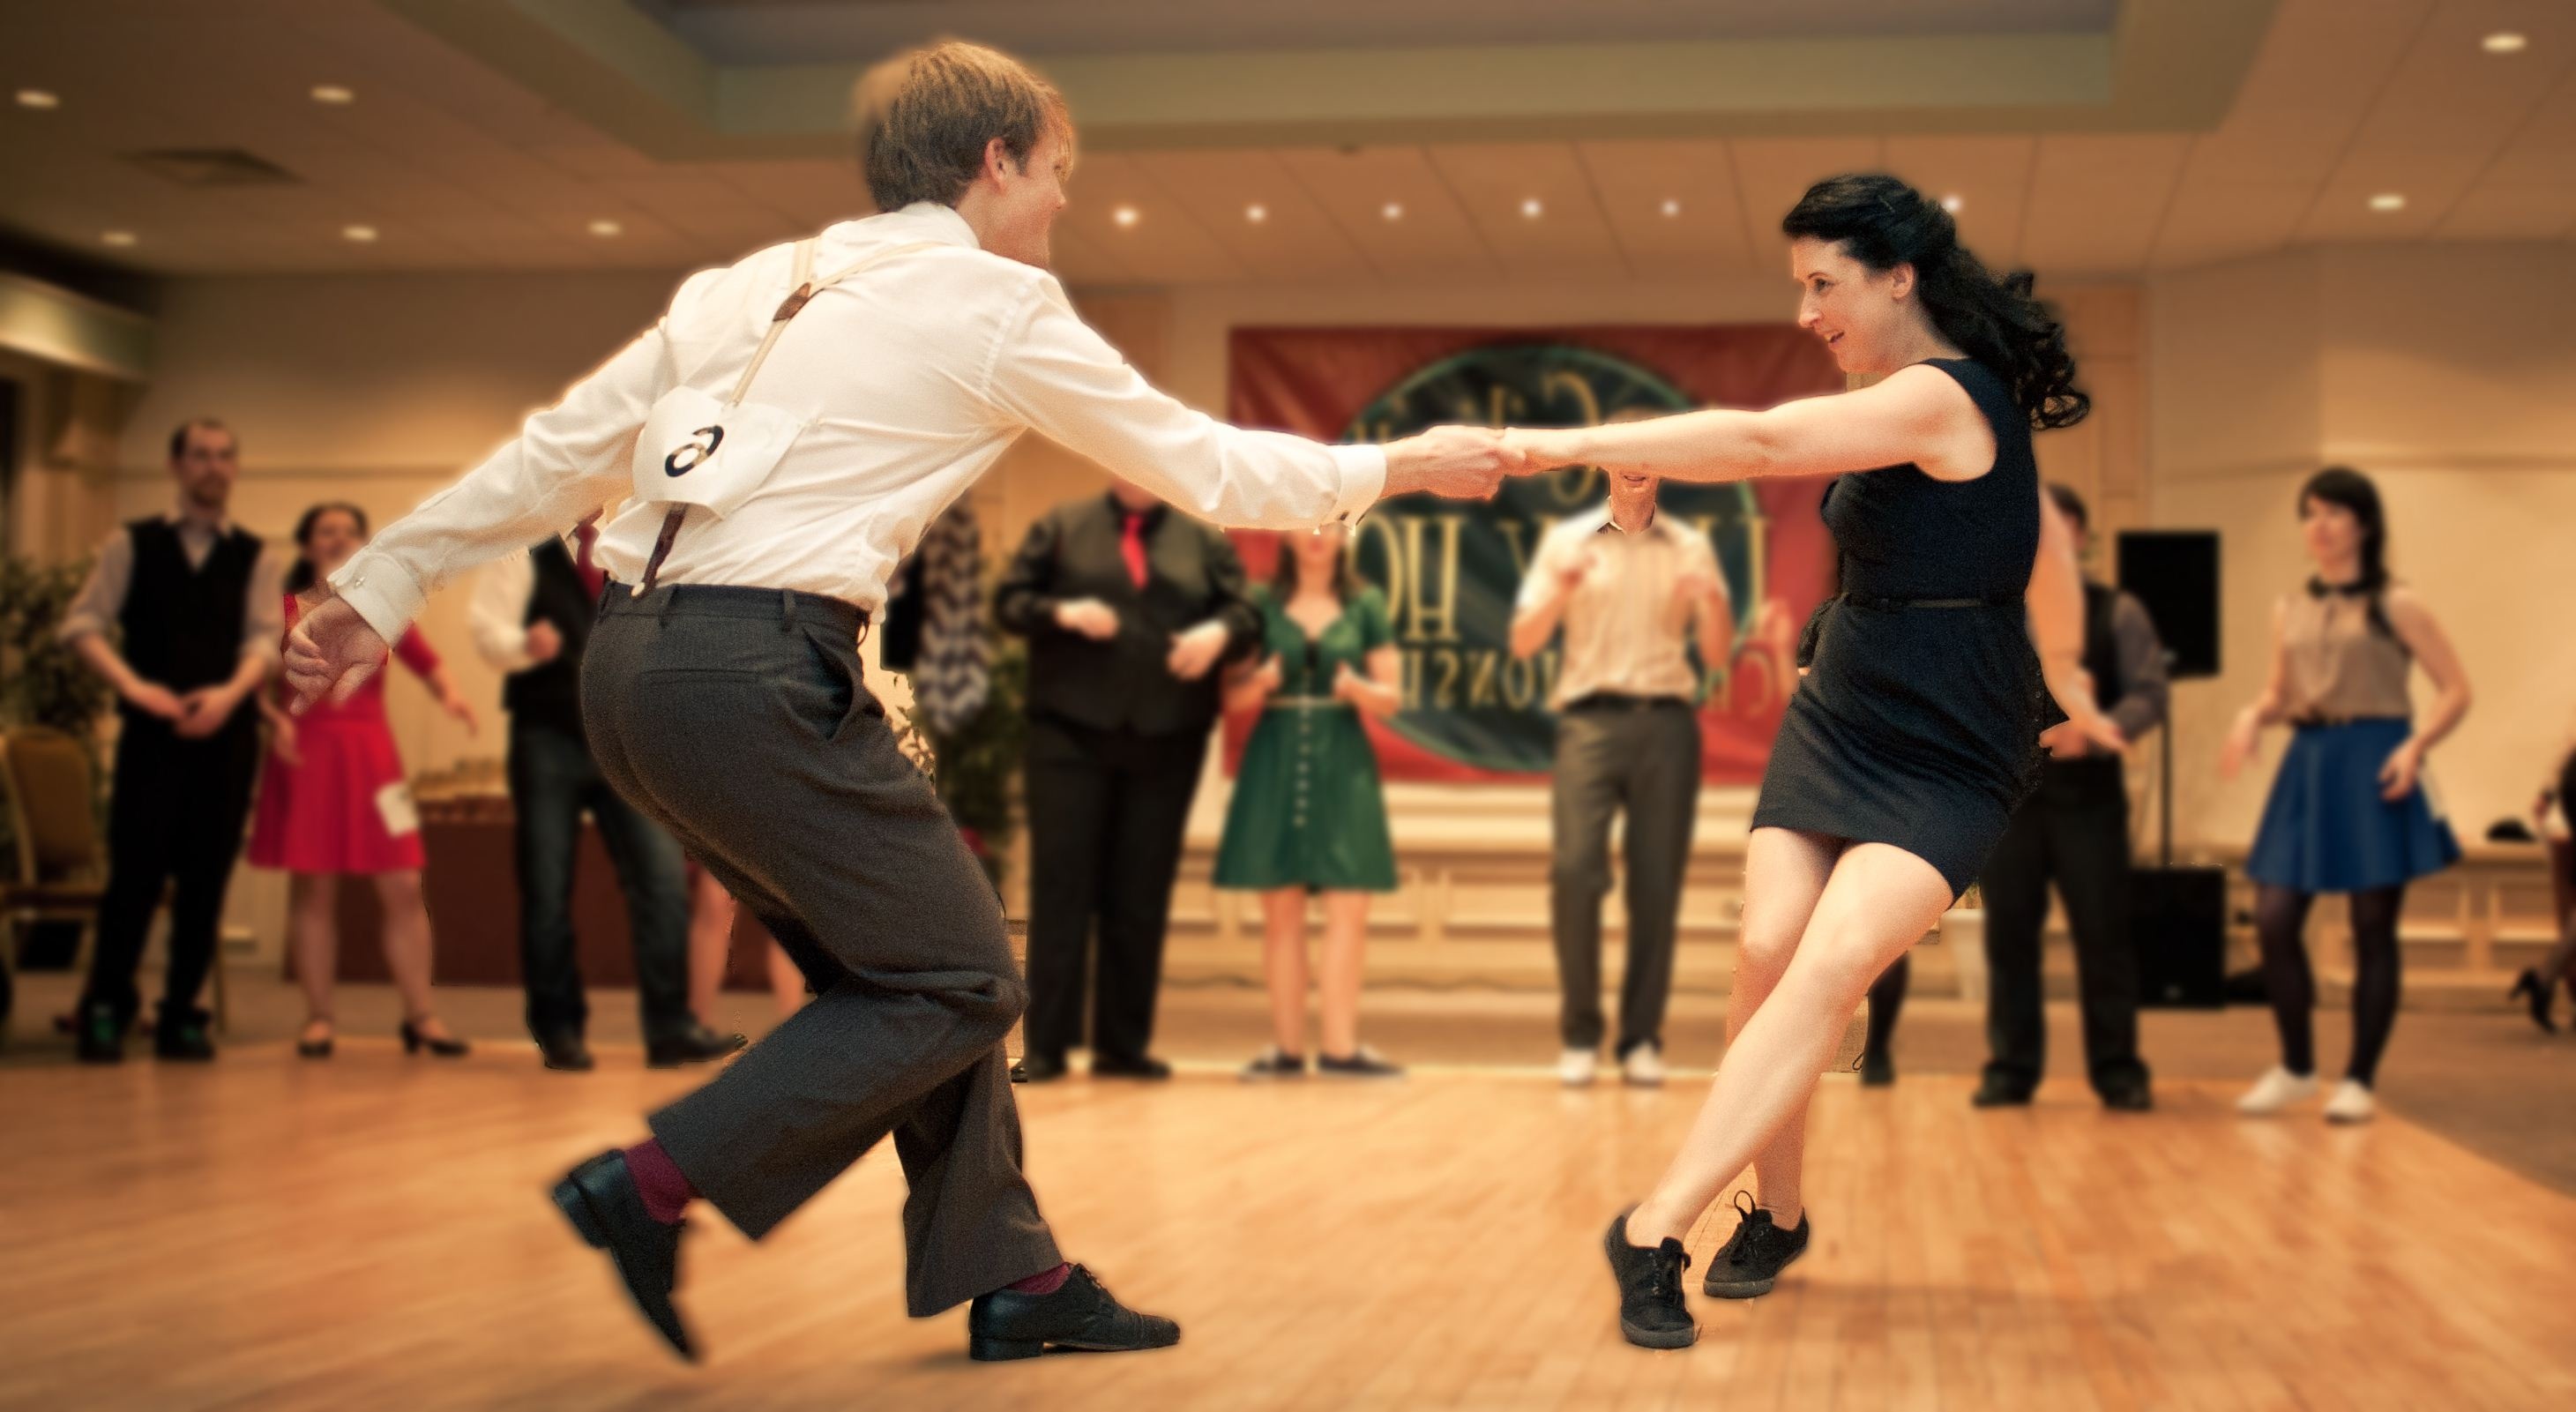 Swing Dance: Indoor Dancing Competition, A High Degree Of Physical Vigor Required, Dancers Pair. 2930x1610 HD Wallpaper.